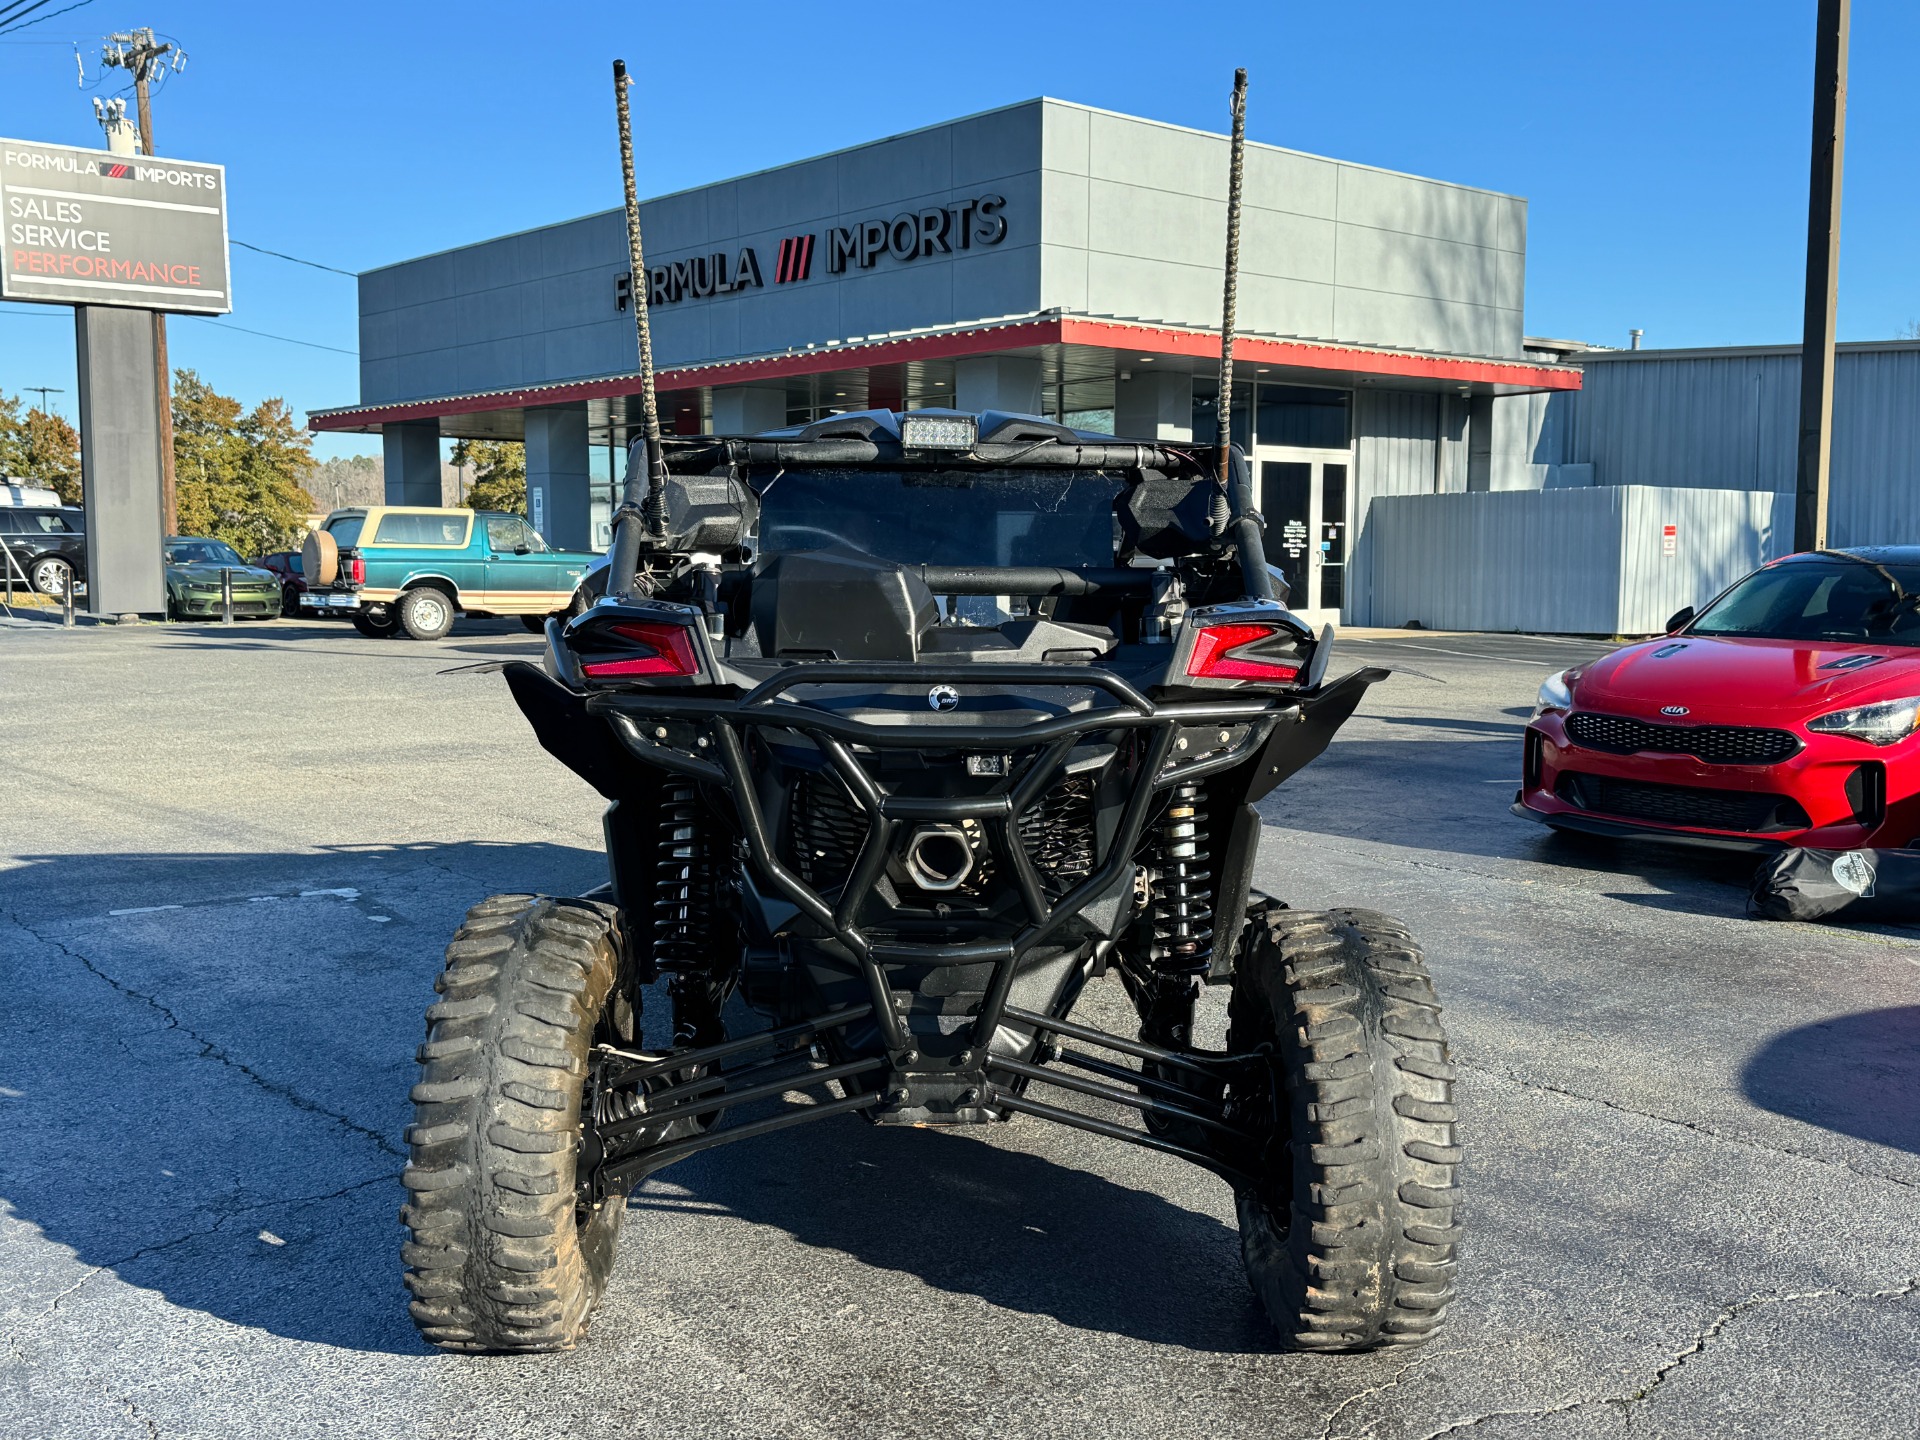 Used 2019 Can-Am Maverick Max XDS 1000 Turbo LIGHTBARS / SOUND SYSTEM / CB RADIO / WHEELS & TIRES for sale $29,500 at Formula Imports in Charlotte NC 28227 5